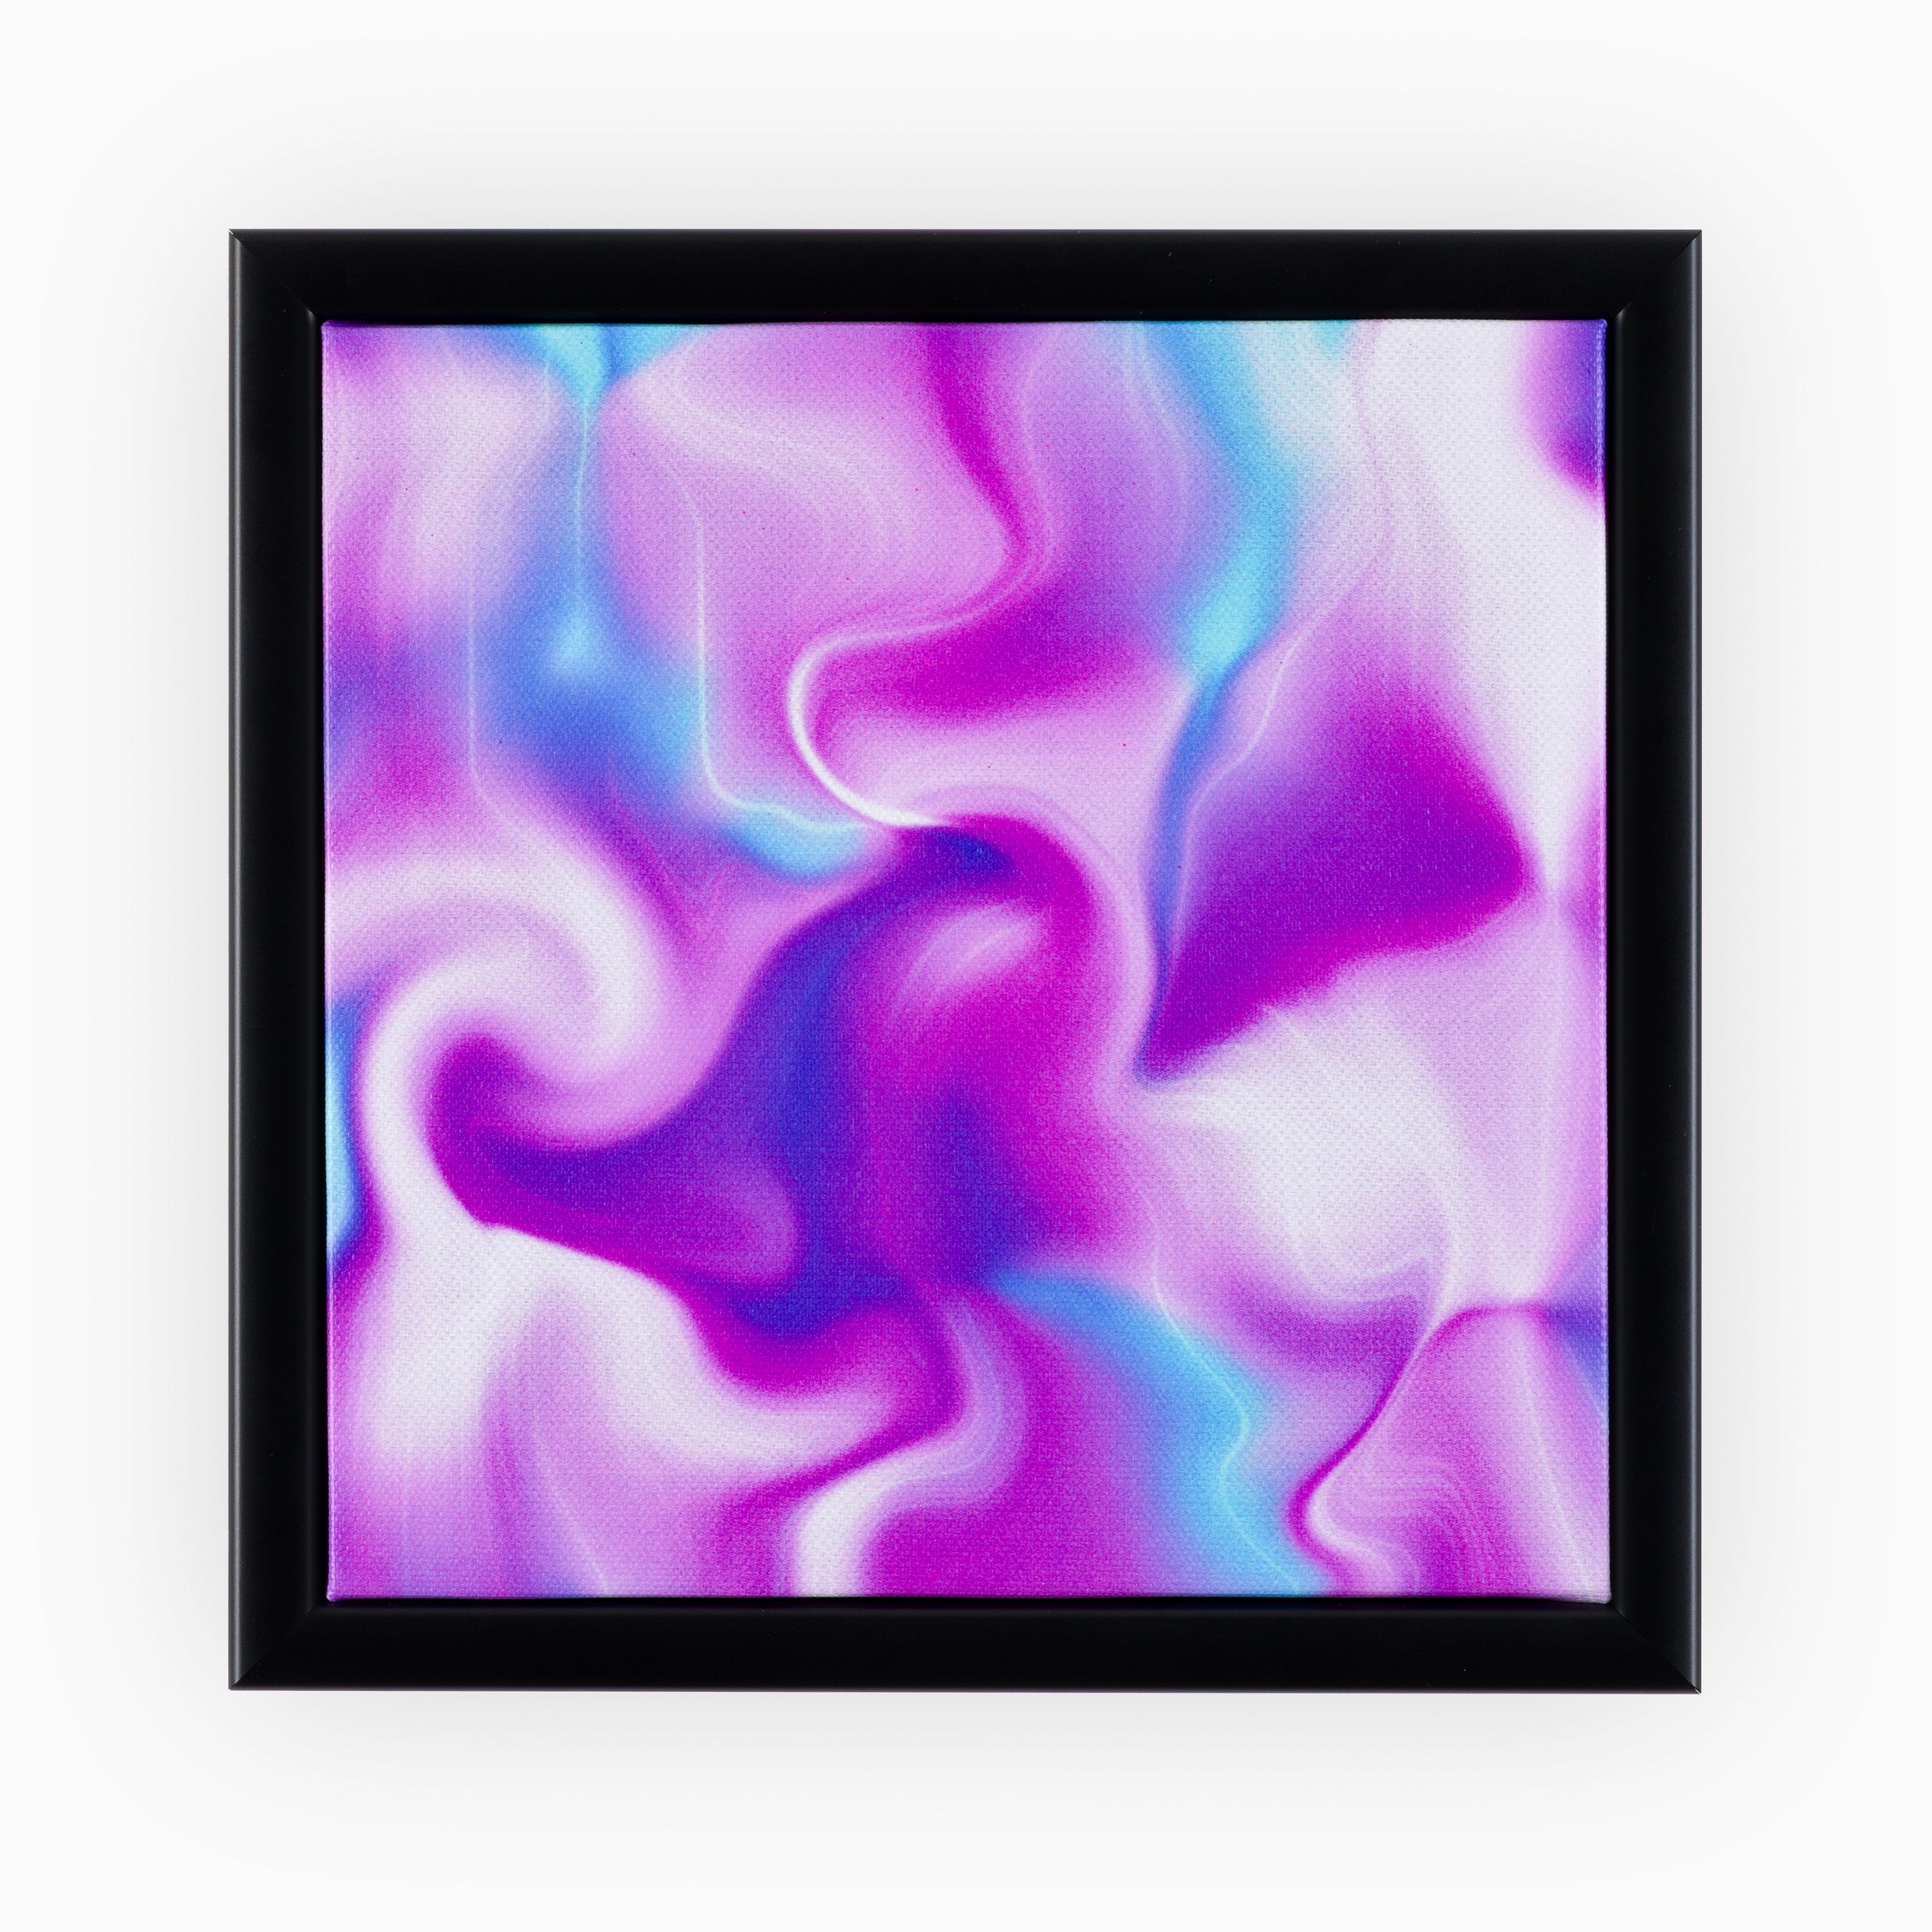 Digitally printed luxury canvas, encased in a sophisticated black frame, with a swirling pattern of pink, purple, and blue hues, resembling an ethereal ink drop in water.